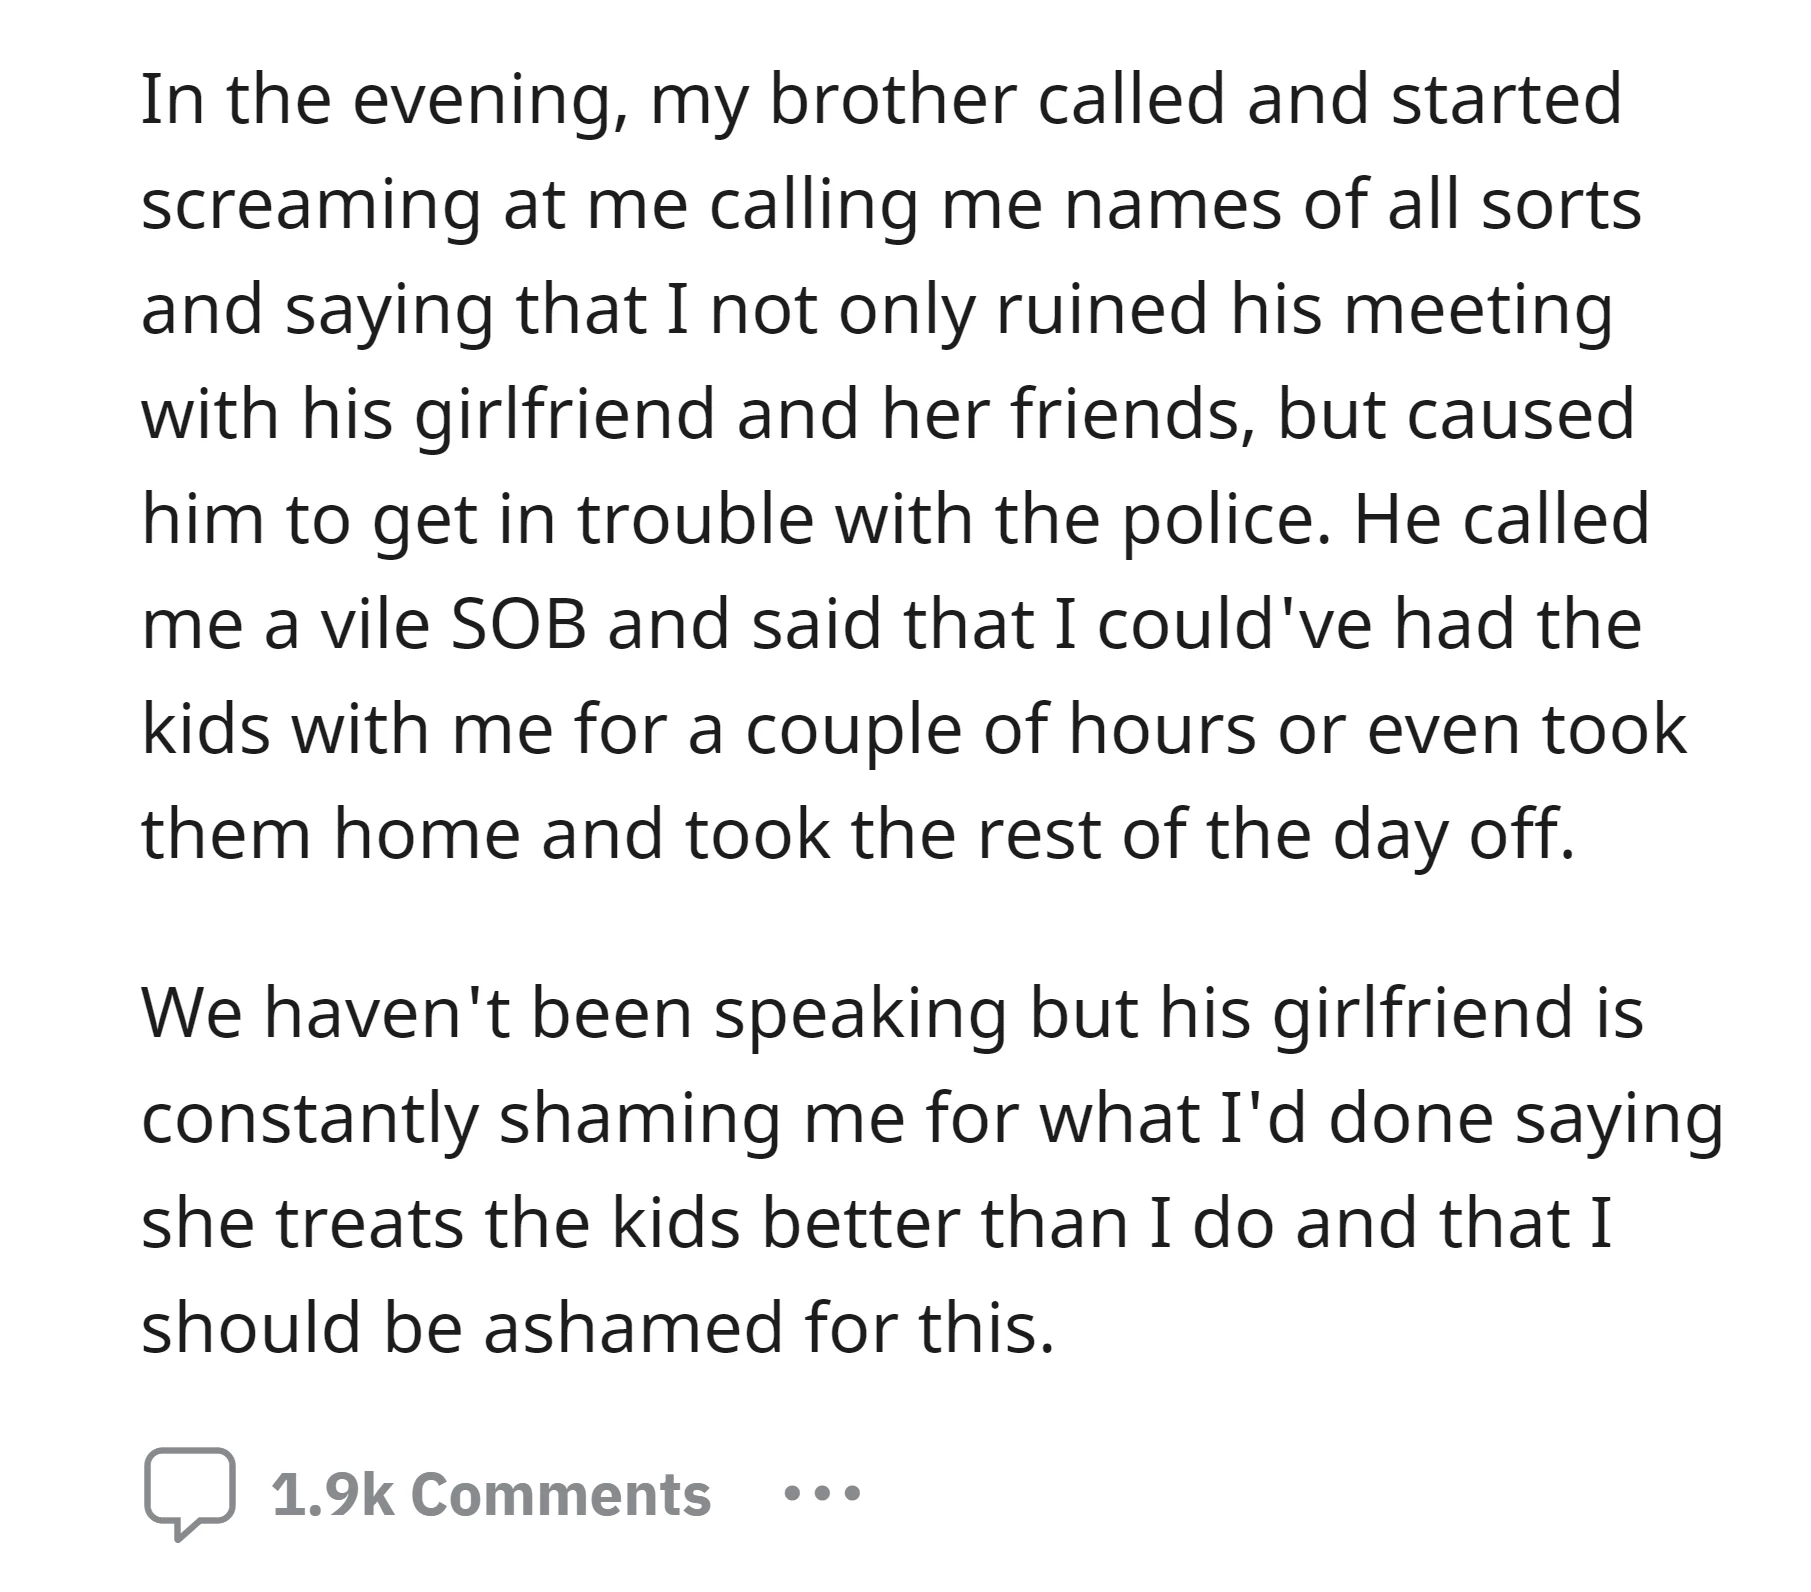 OP's brother angrily accused them of ruining his plans and getting him in trouble with the police